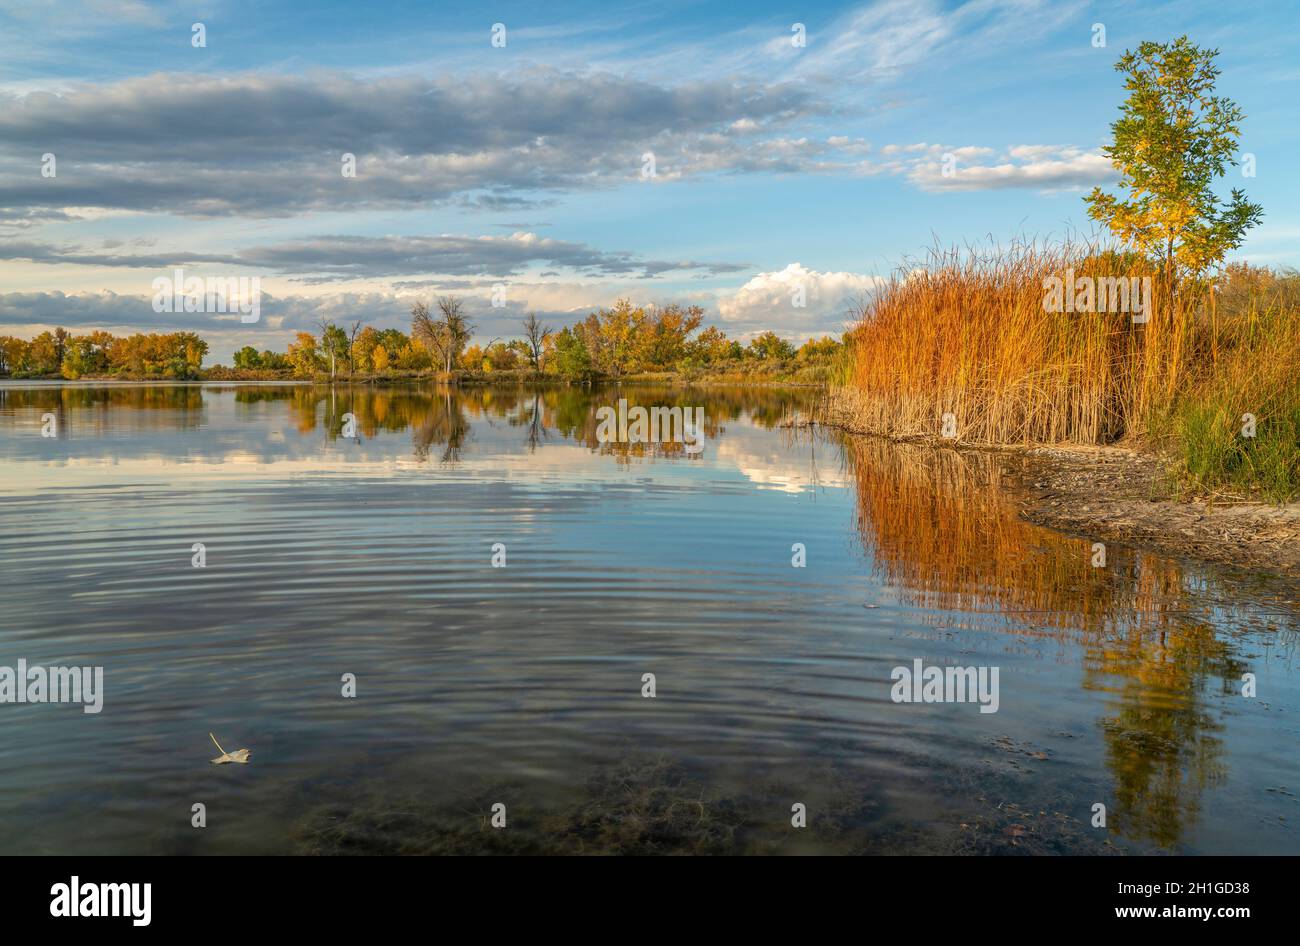 calm lake at sunset in one of Fort Collins natural areas in northern Colorado, fall scenery Stock Photo